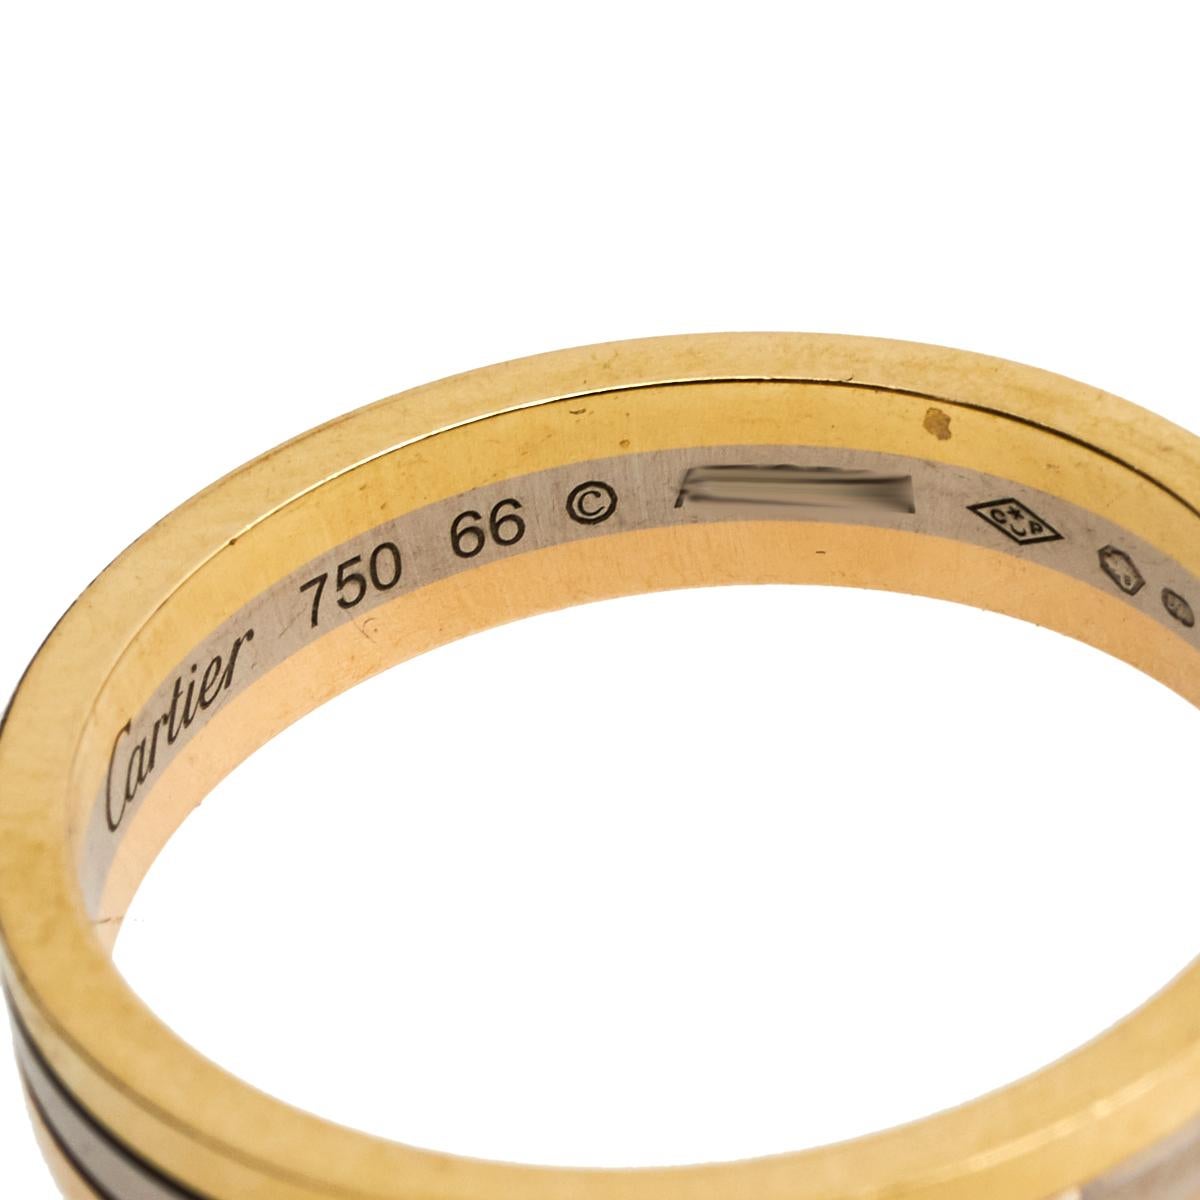 Let this elegant wedding ring by Loius Vuitton sit on your finger and beautifully complement your ensembles. The creation comes in 18k gold and features an assembly of three bands stacked together. The ring flaunts beautiful tones of gold — rose,